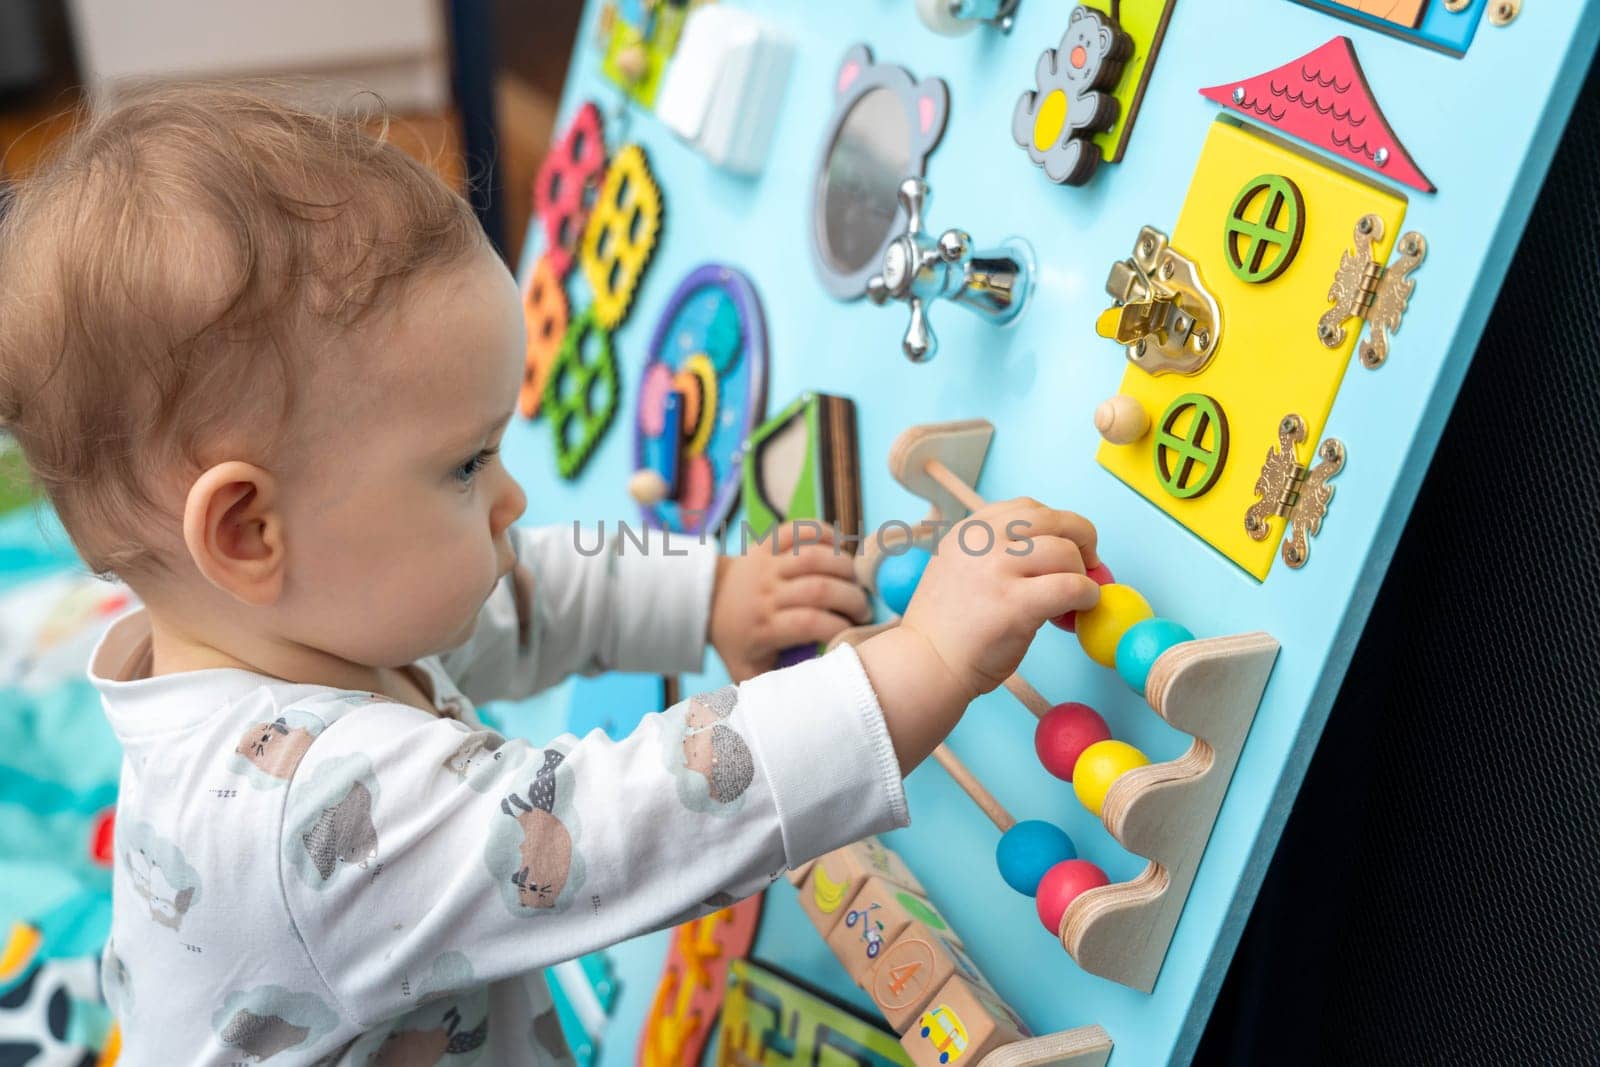 Profile of a cute baby playing with wooden elements on a busy board.